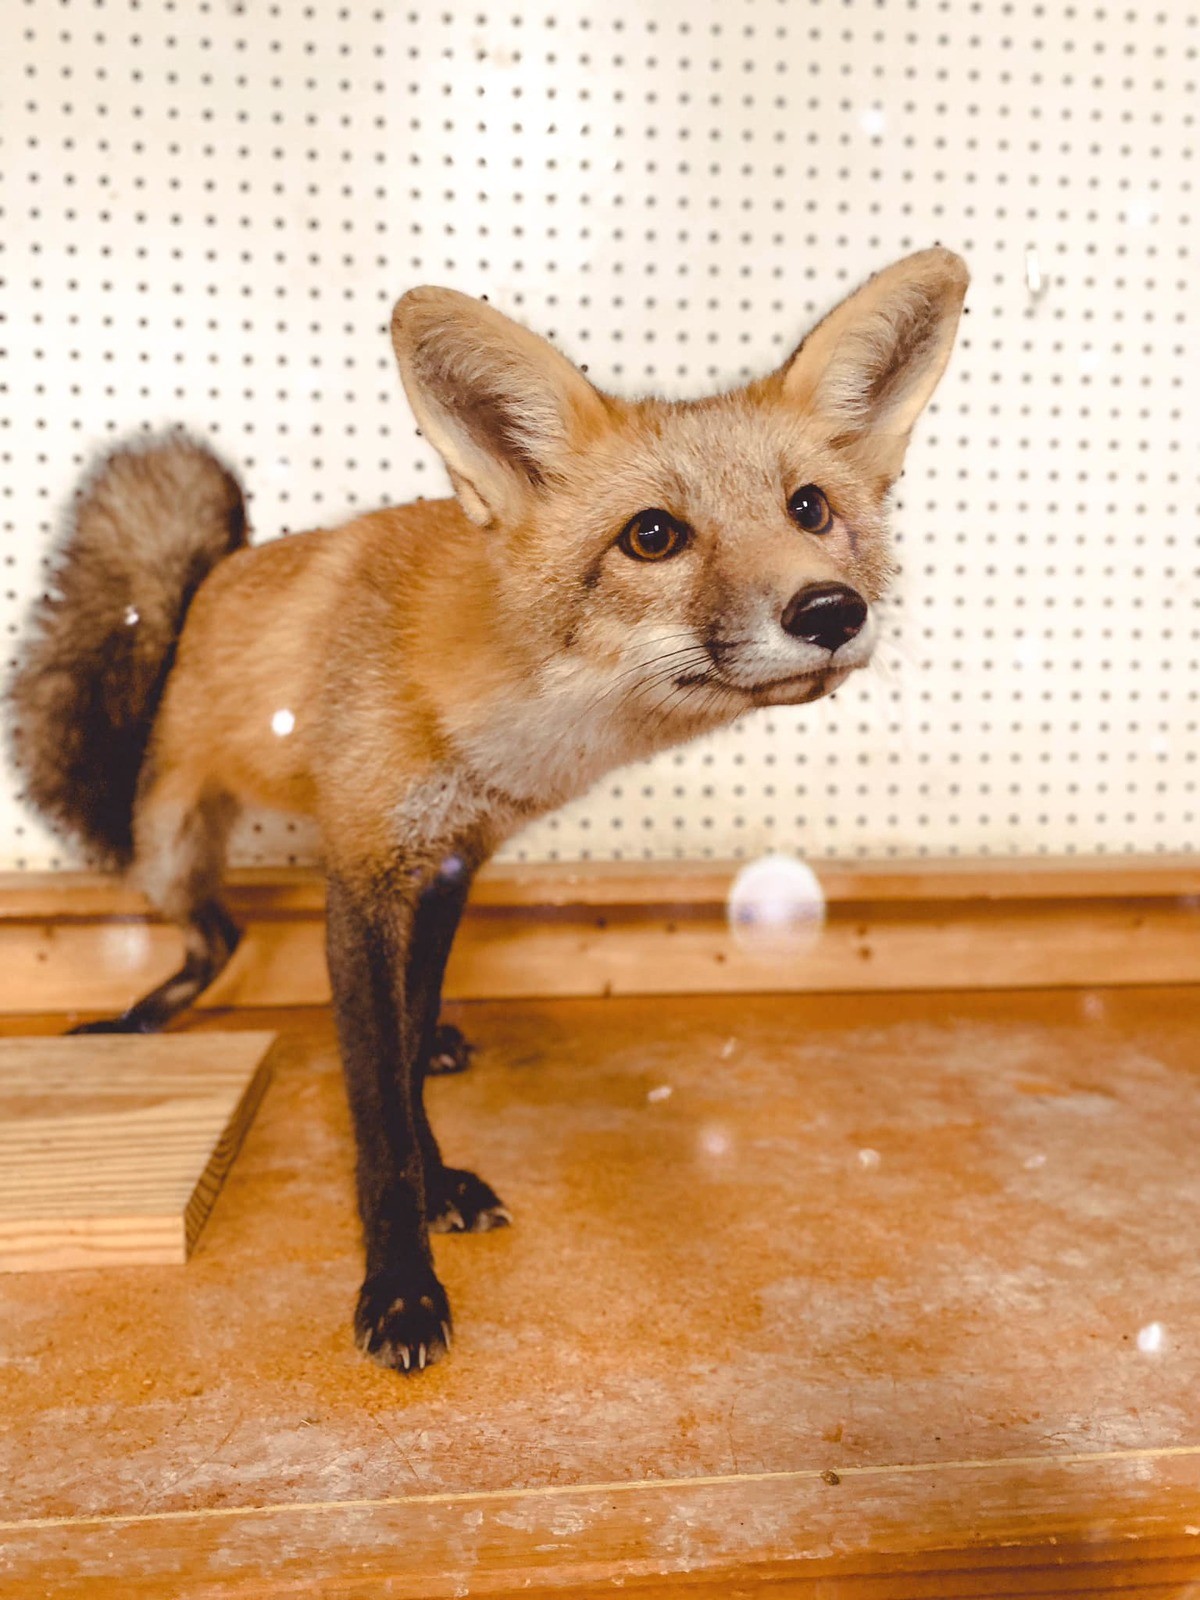 Eevee. join list: RescueCritters (53 subs)Mention History Eevee is a resident red fox at Arctic Fox Daily Wildlife Rescue Look at her blep!.